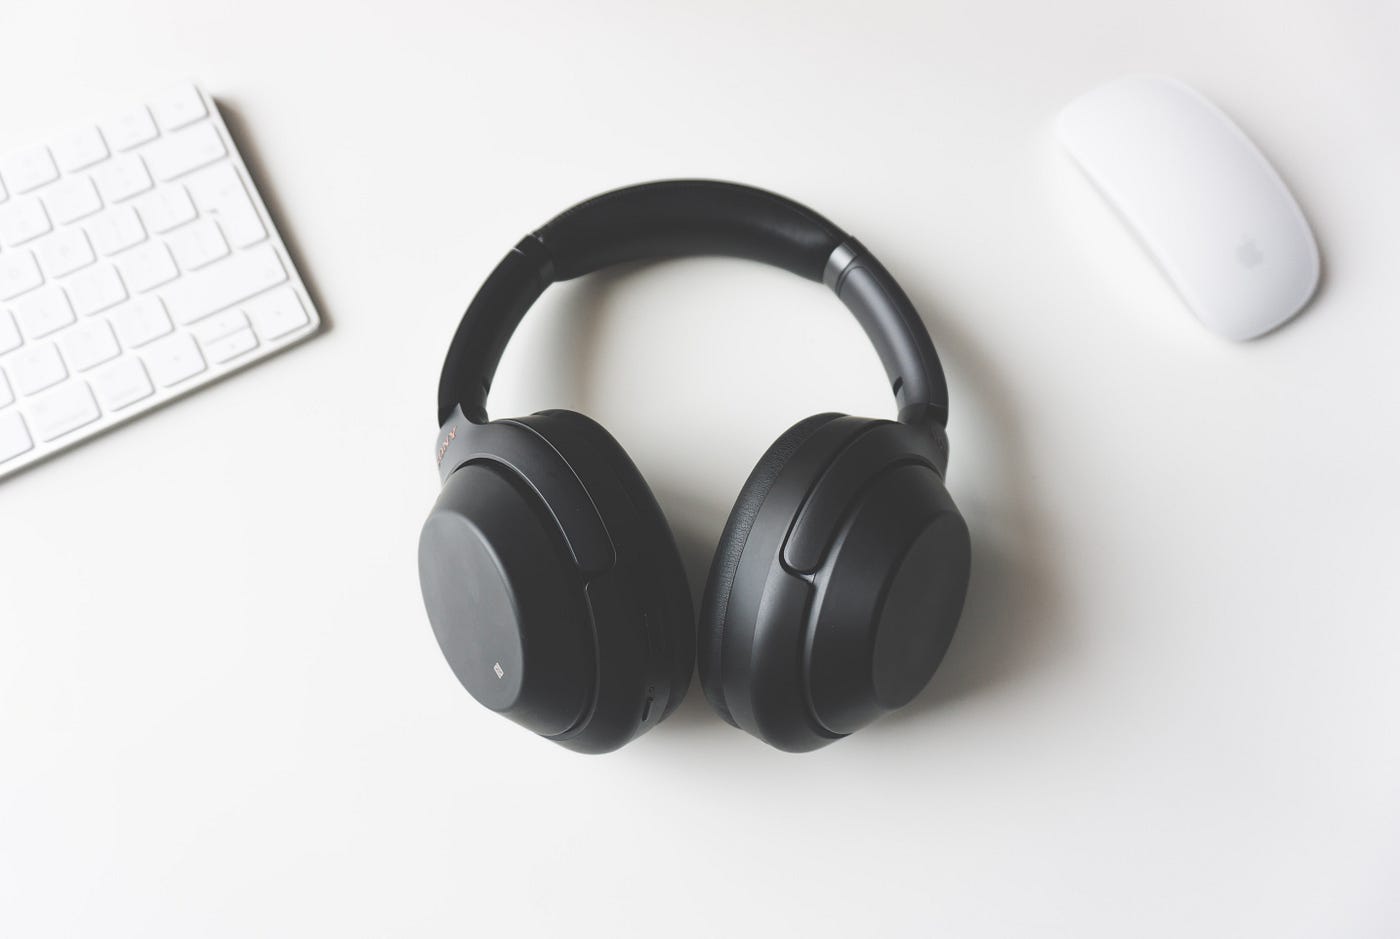 Noise cancelling headphones are crucial for remote work